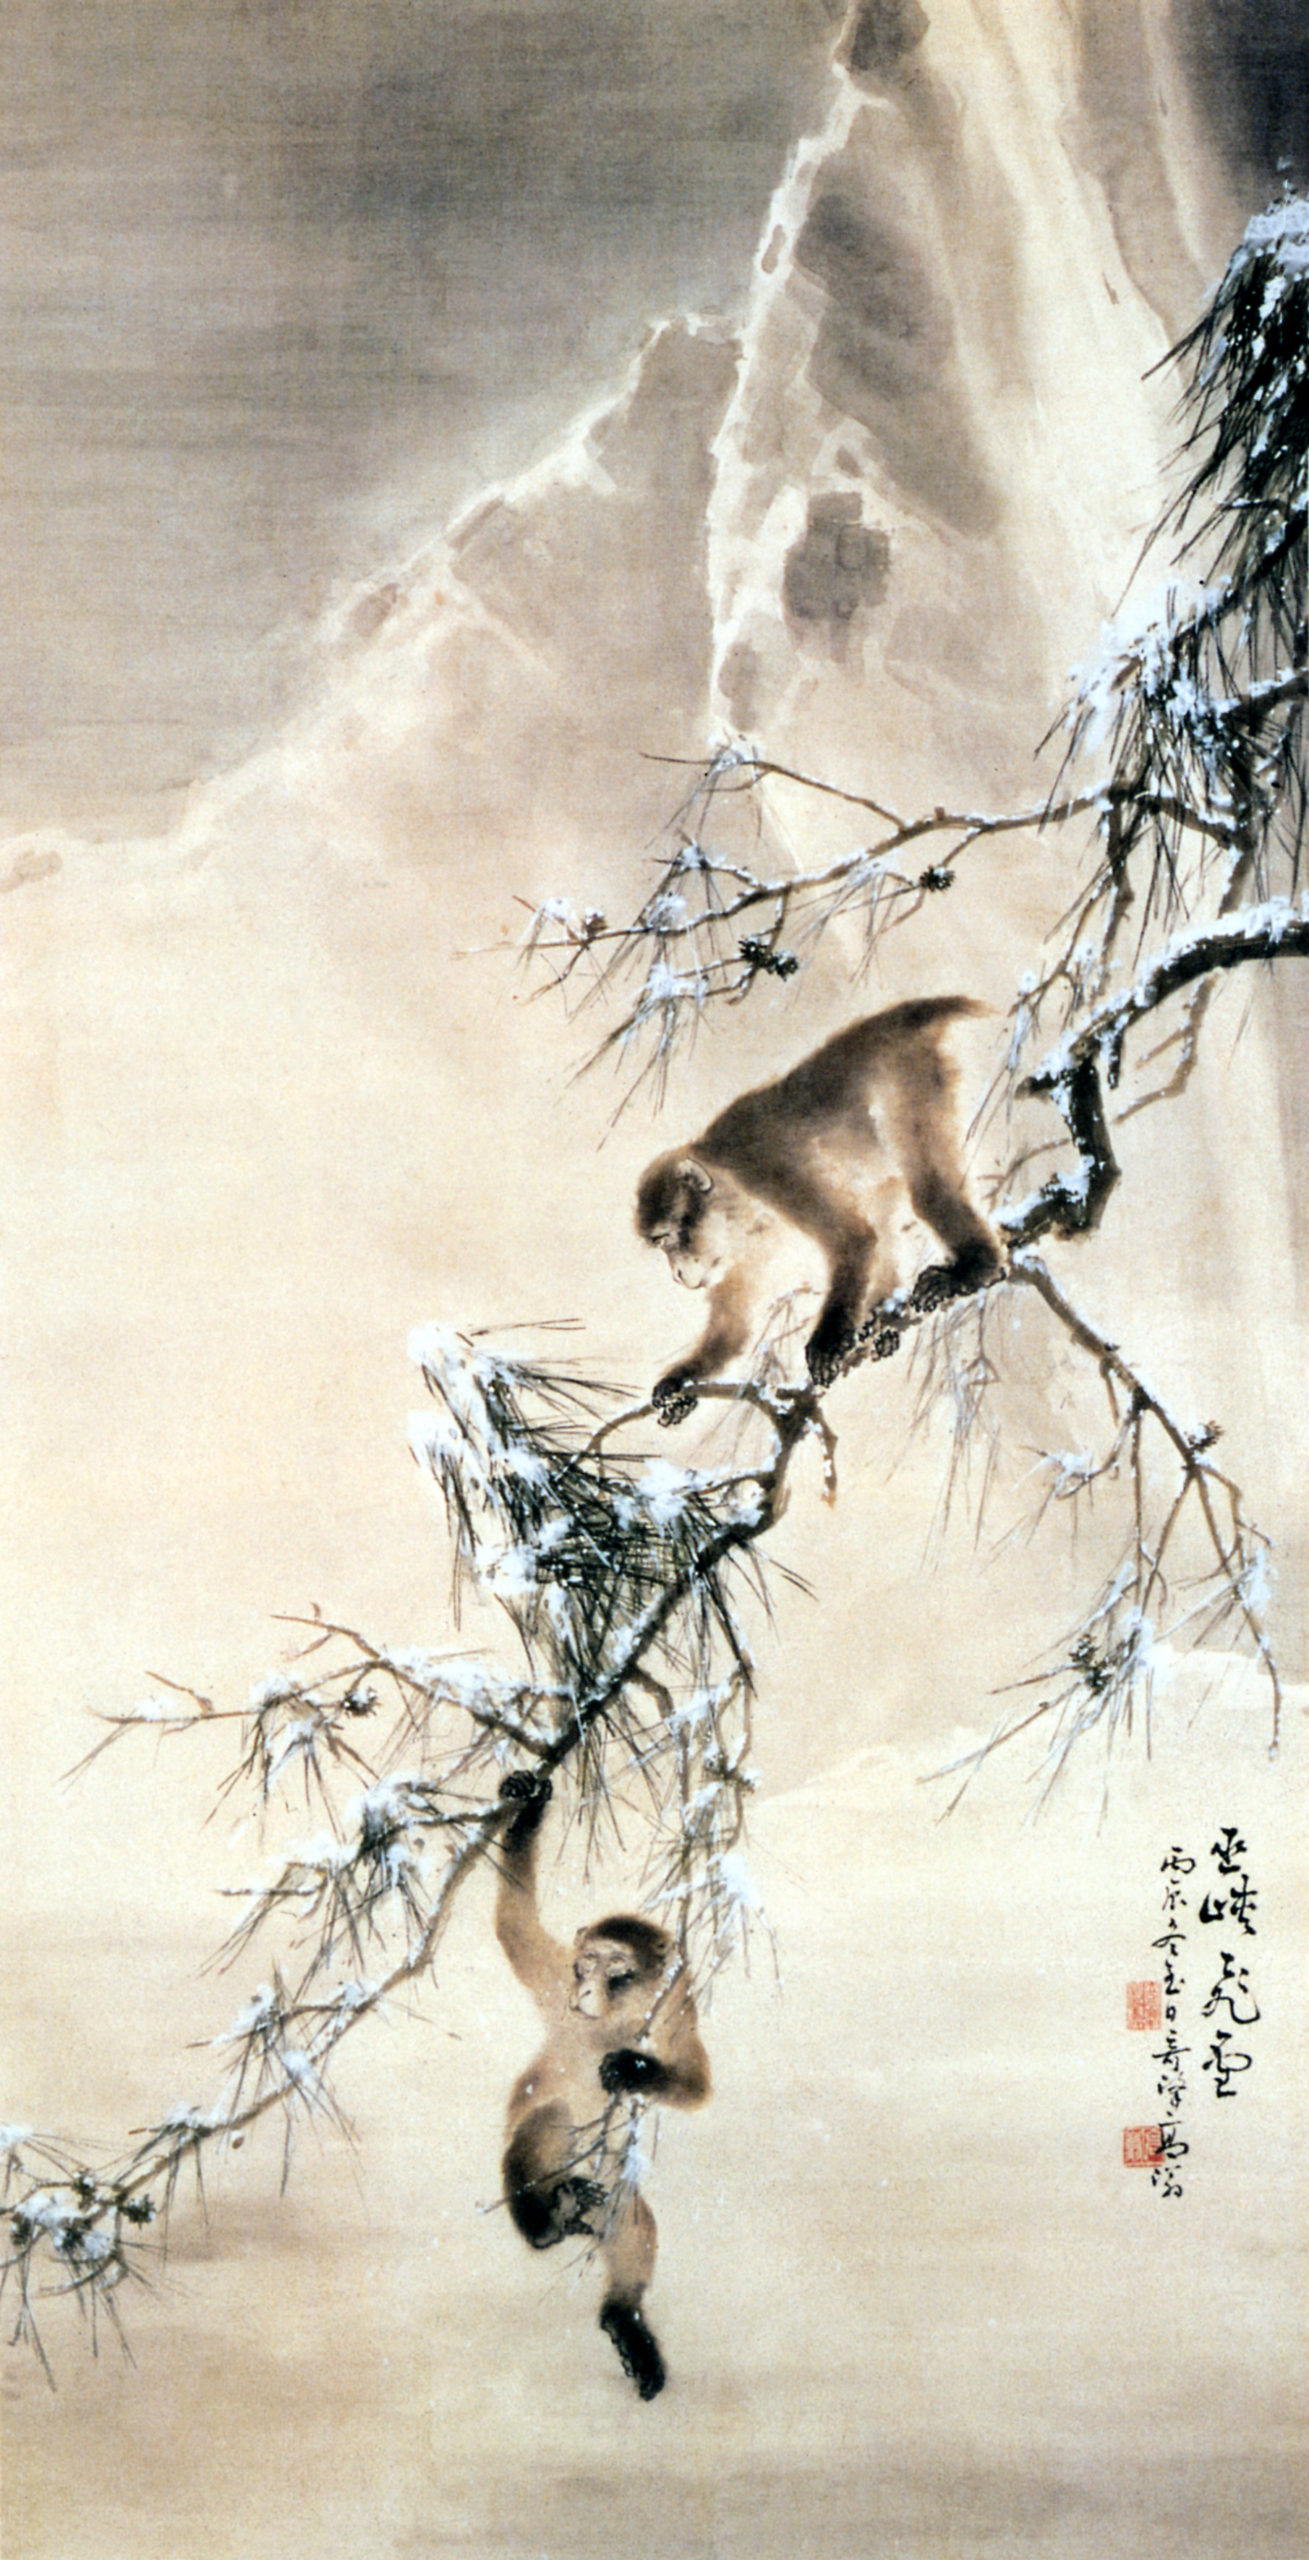 Gao Qifeng, Monkeys and a Snowy Pine, 1916, Republican Period, ink and color on paper (hanging scroll), China (Hong Kong Museum of Art, Provisional Urban Council, Hong Kong, PRC)